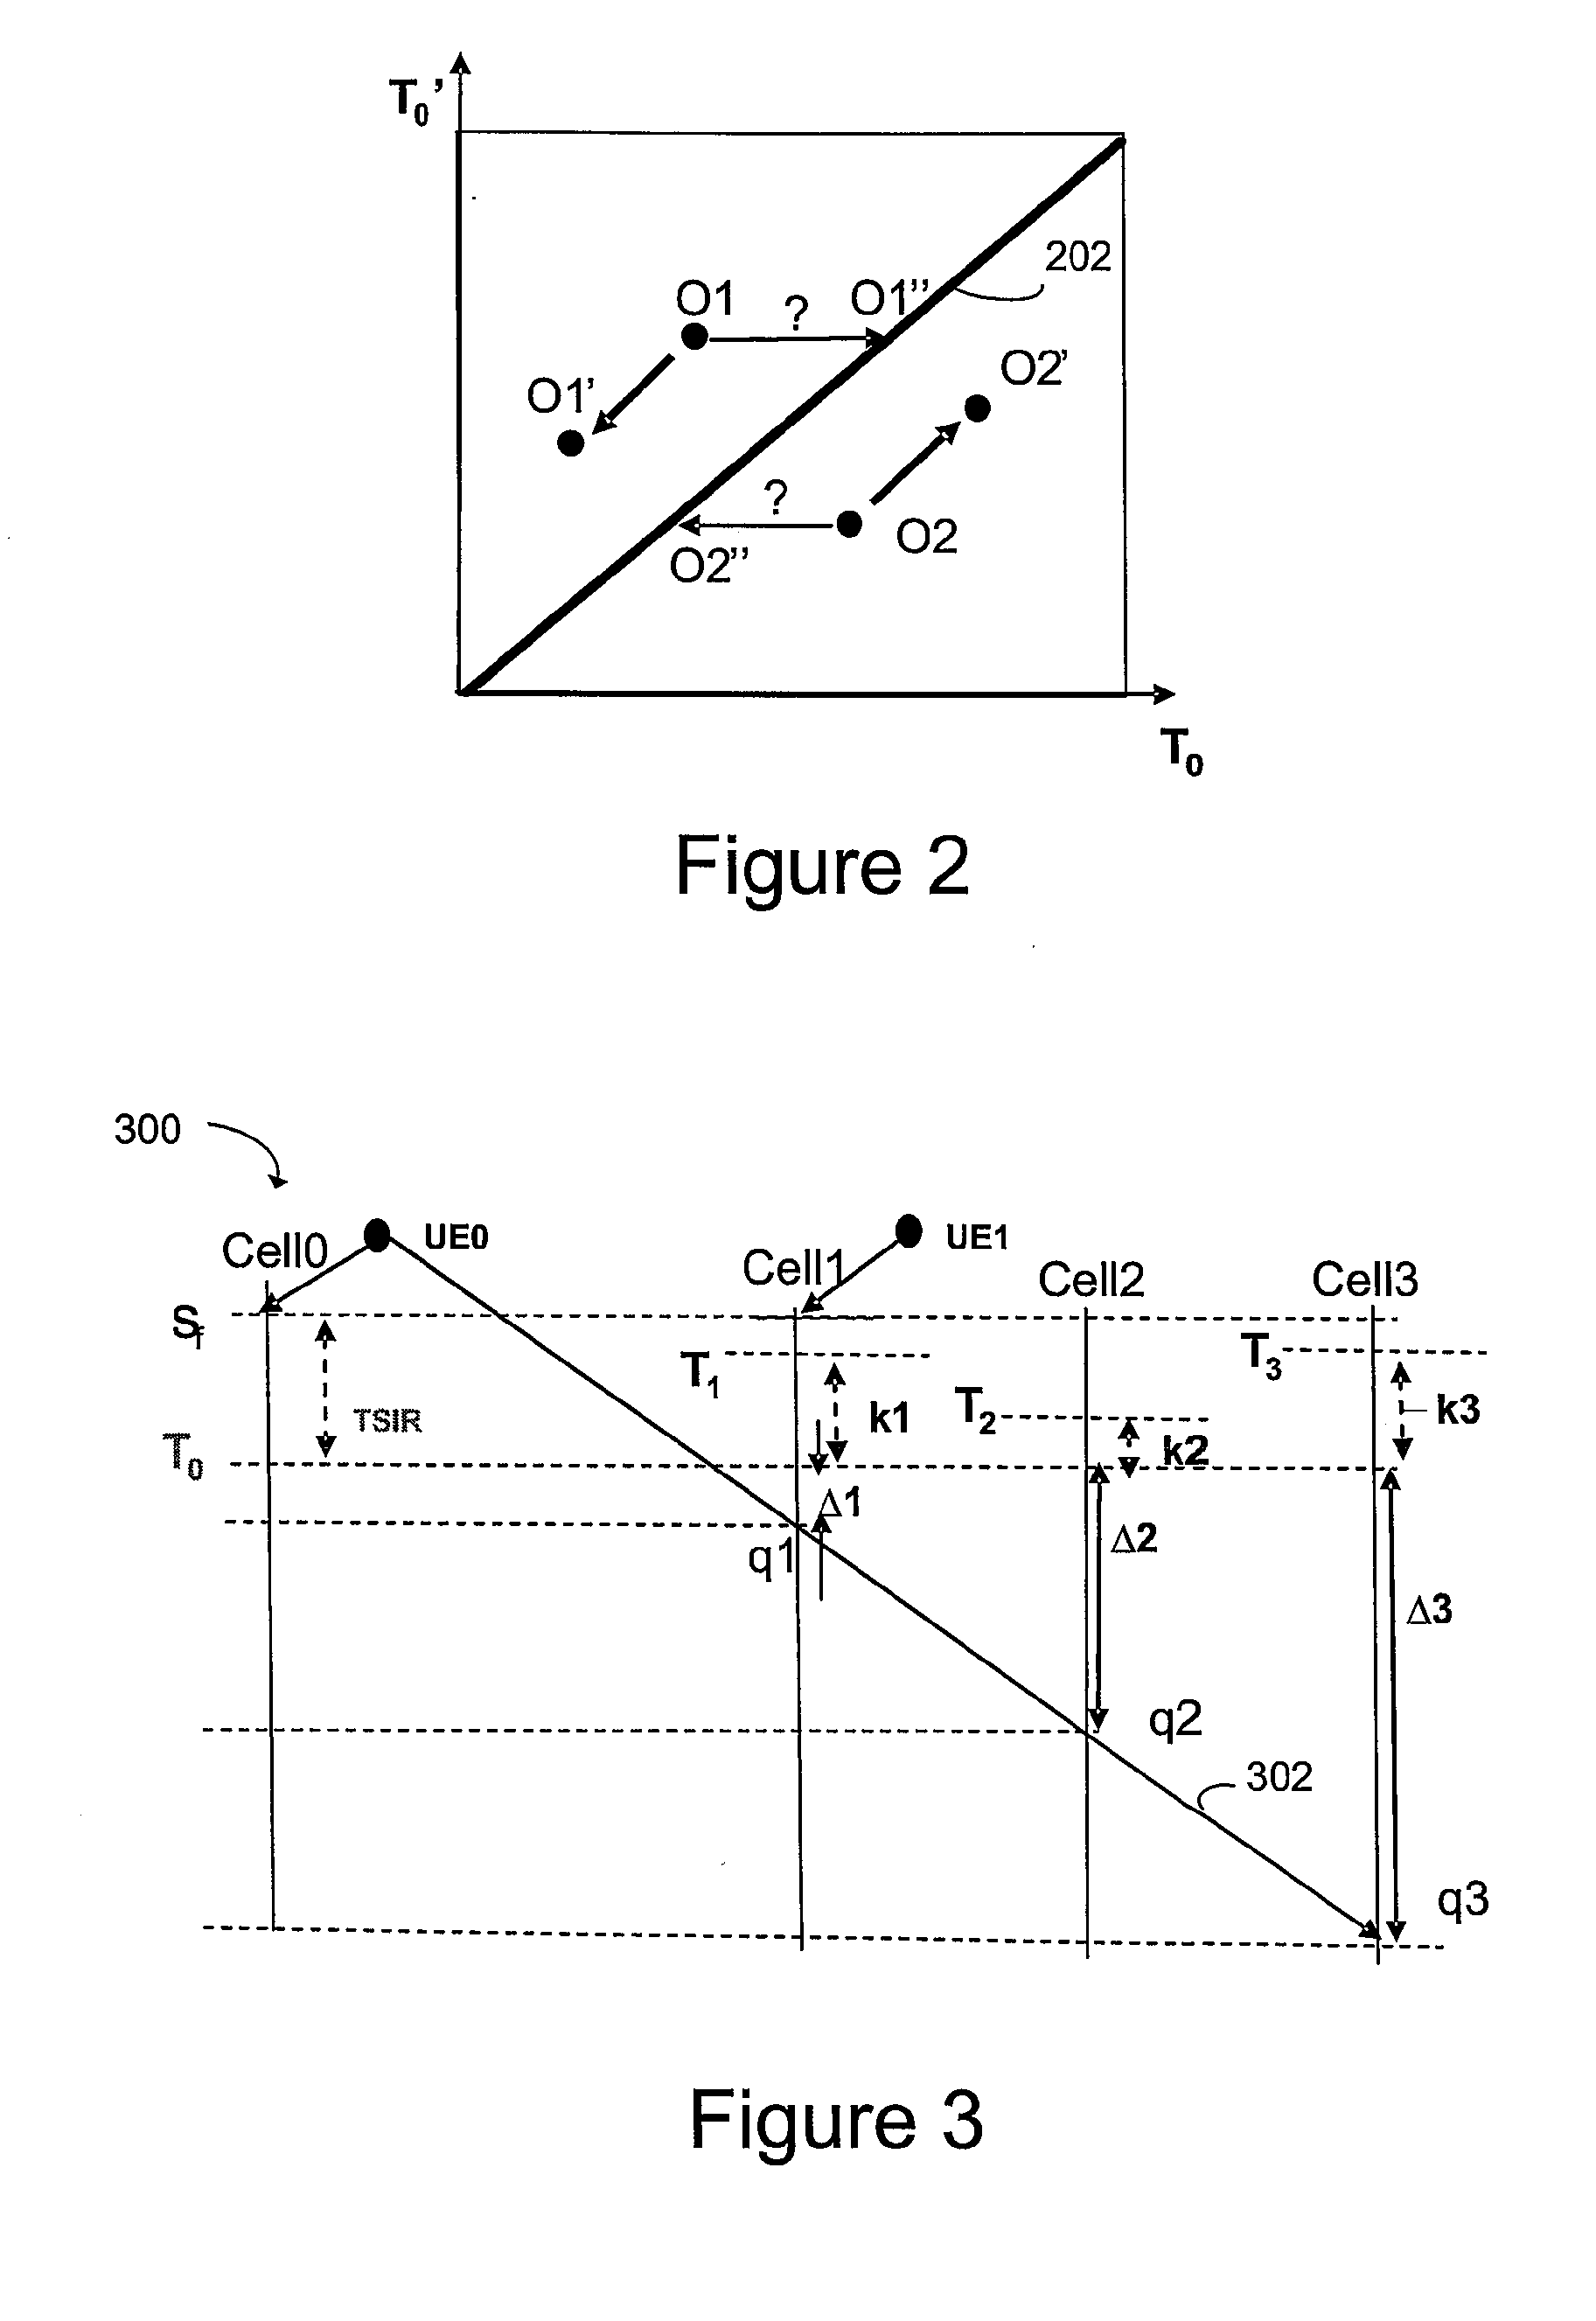 System and Method for Power Control